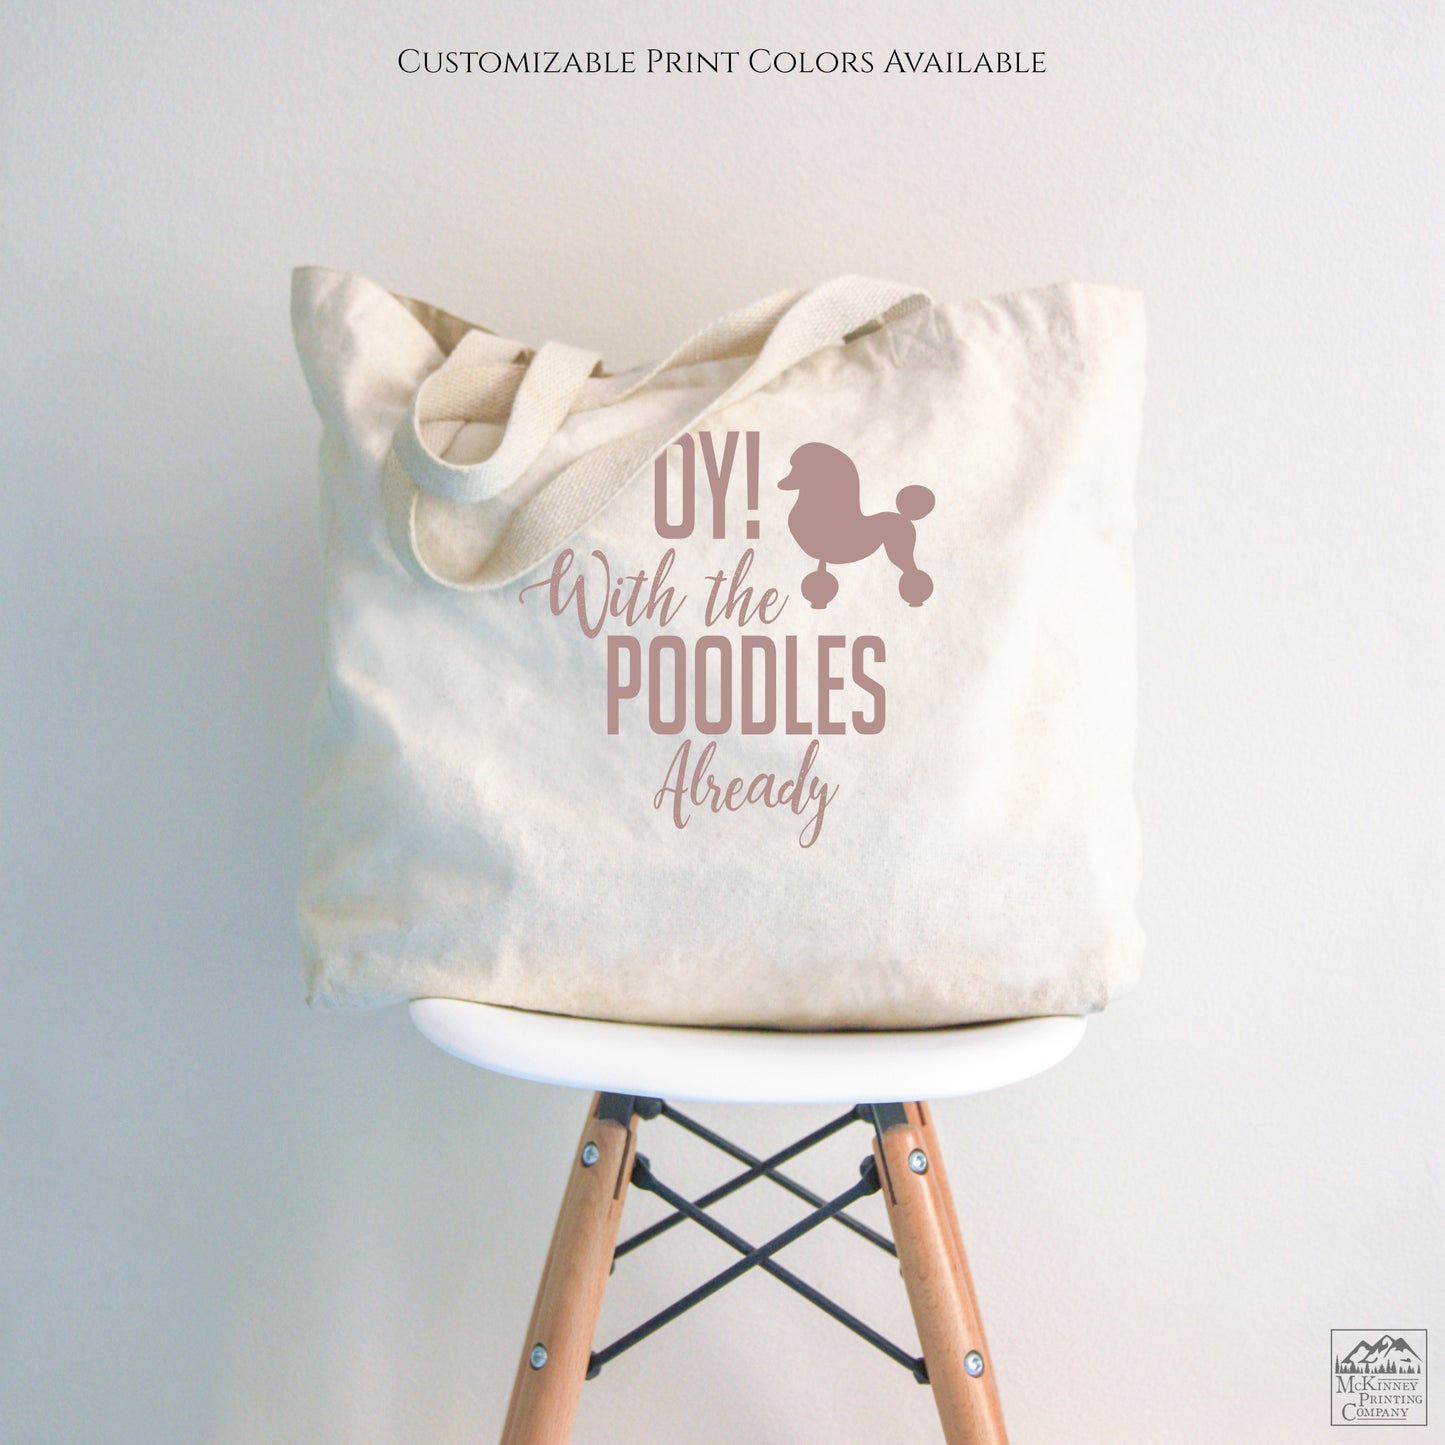 Gilmore Girls - Canvas Tote Bag with Zipper, Oy with the Poodles Already, Fabric Shoulder Bag